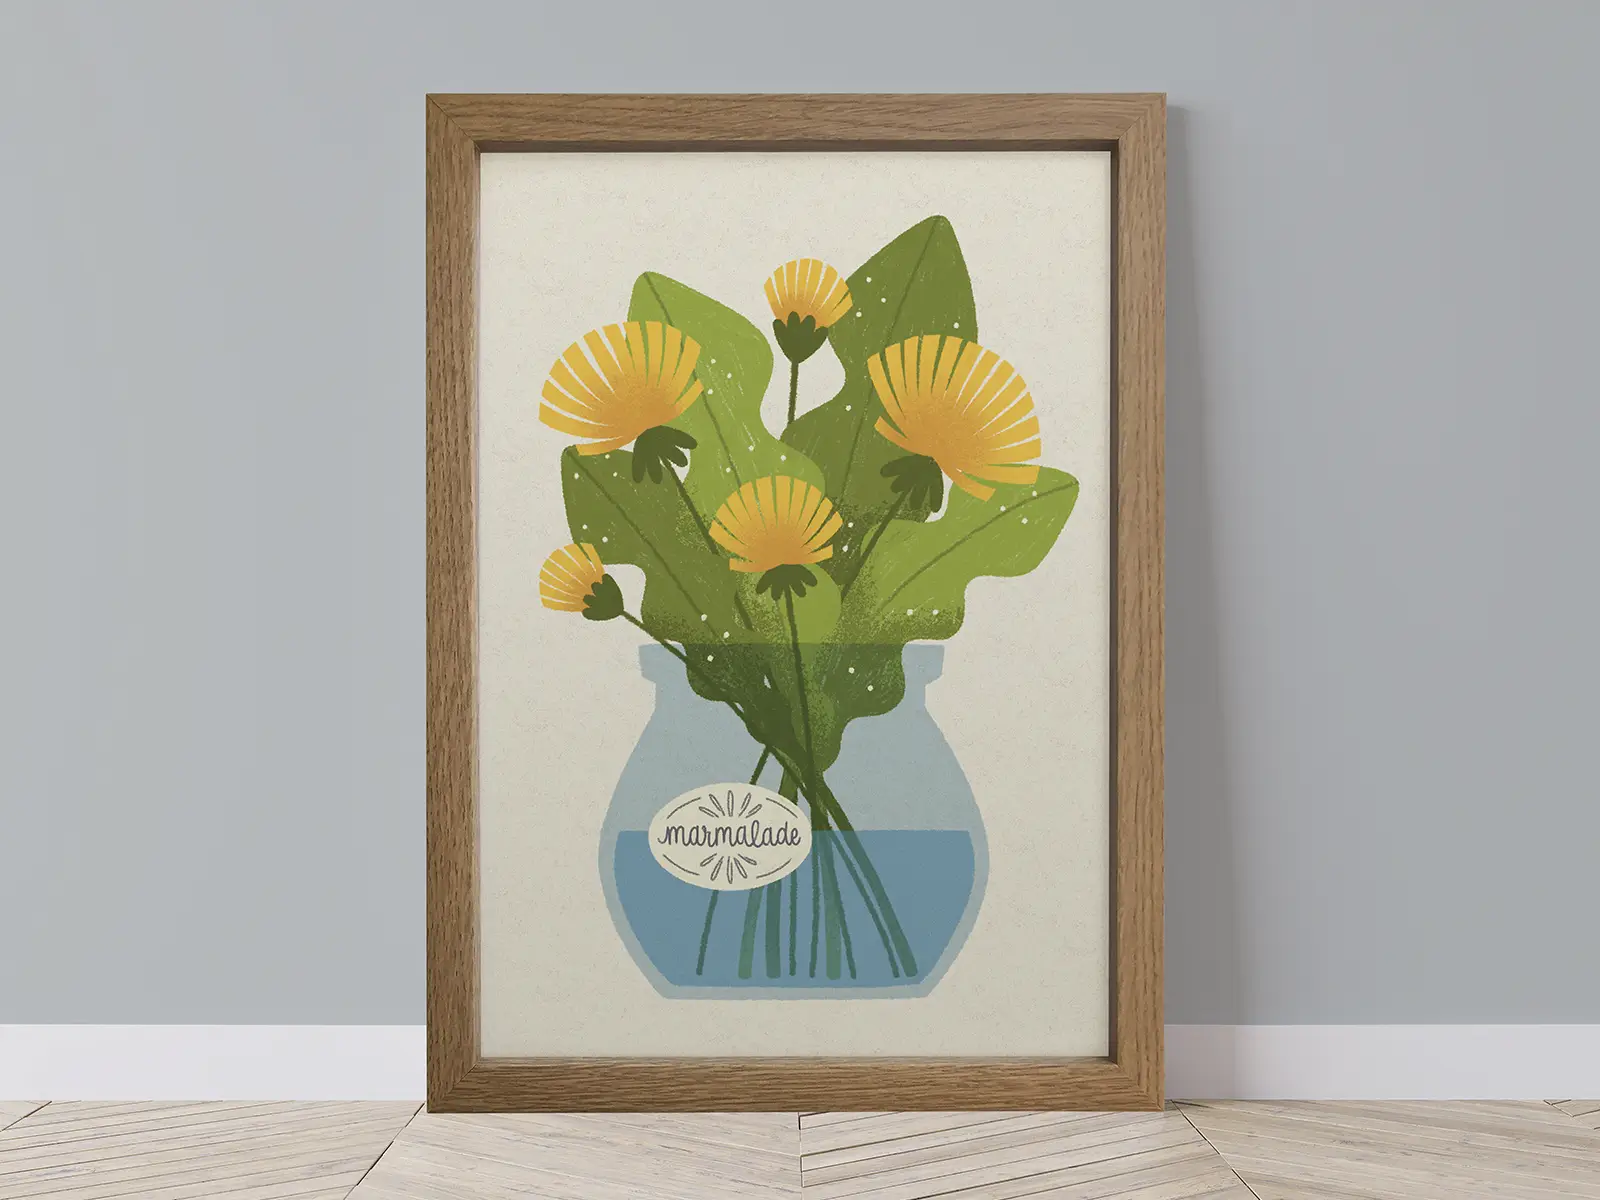 Framed art print featured an illustration of Dandelions in a marmalade jar.